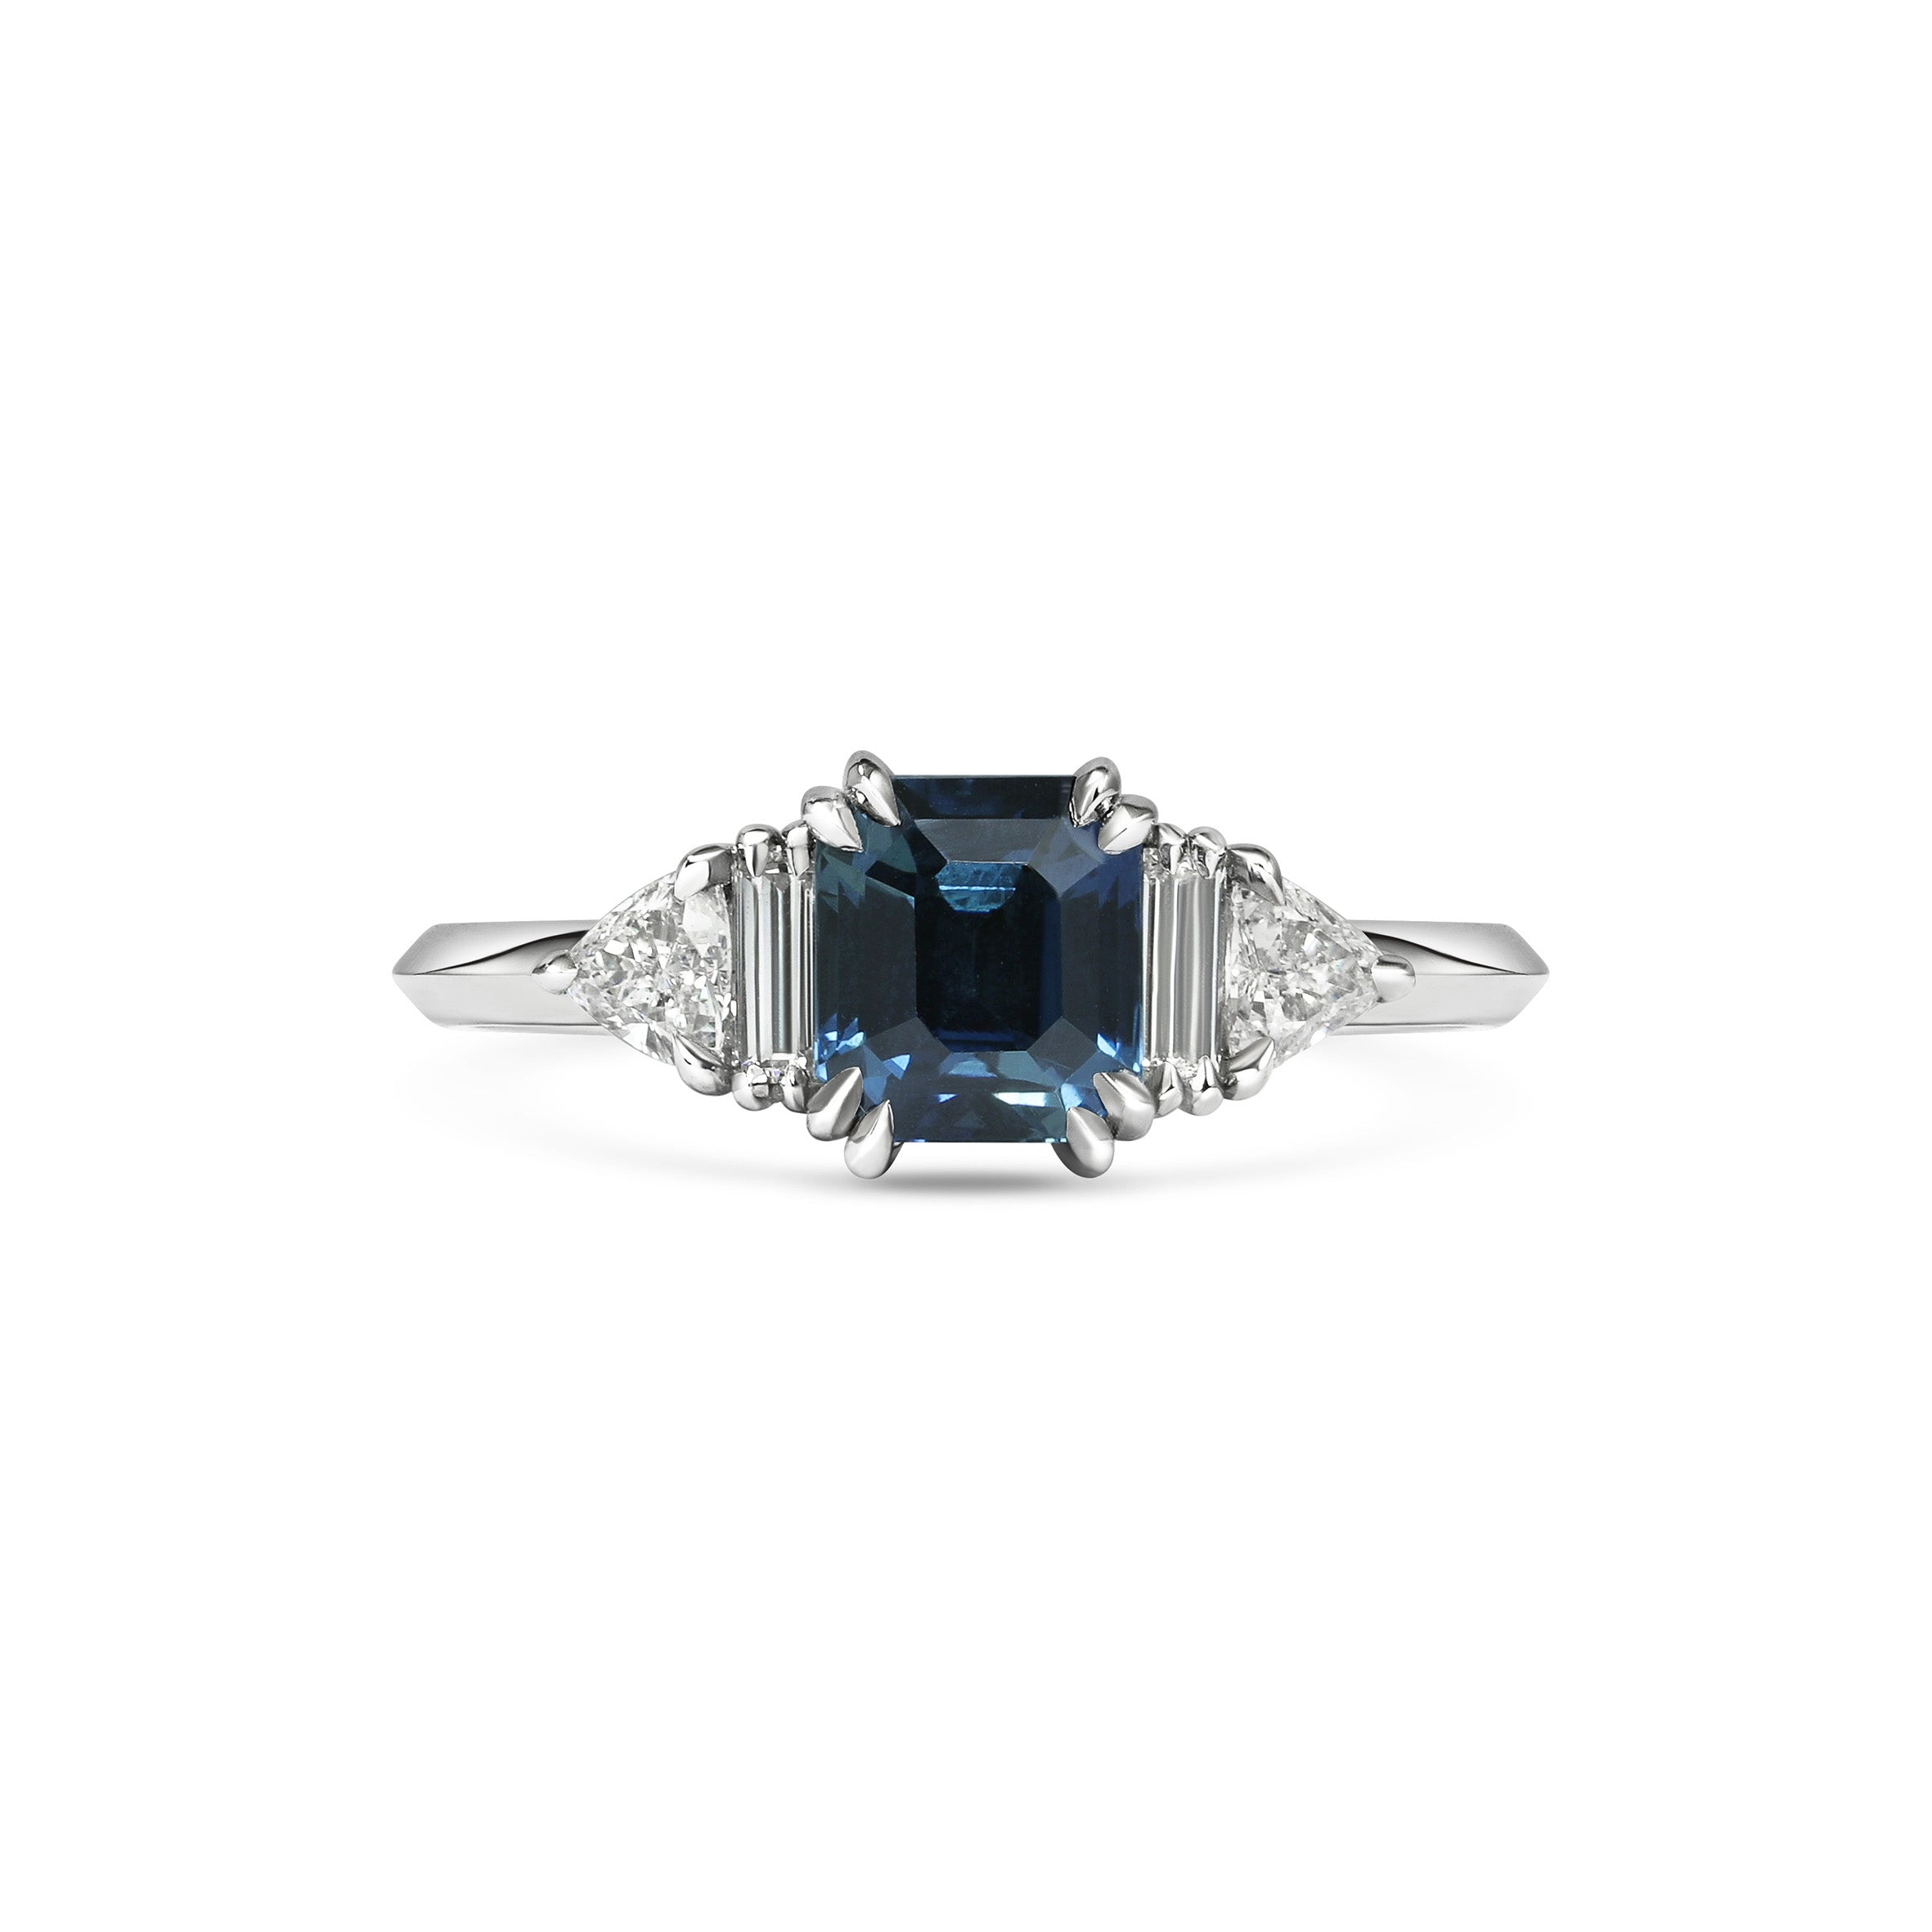 The Aro Ring by East London jeweller Rachel Boston | Discover our collections of unique and timeless engagement rings, wedding rings, and modern fine jewellery.